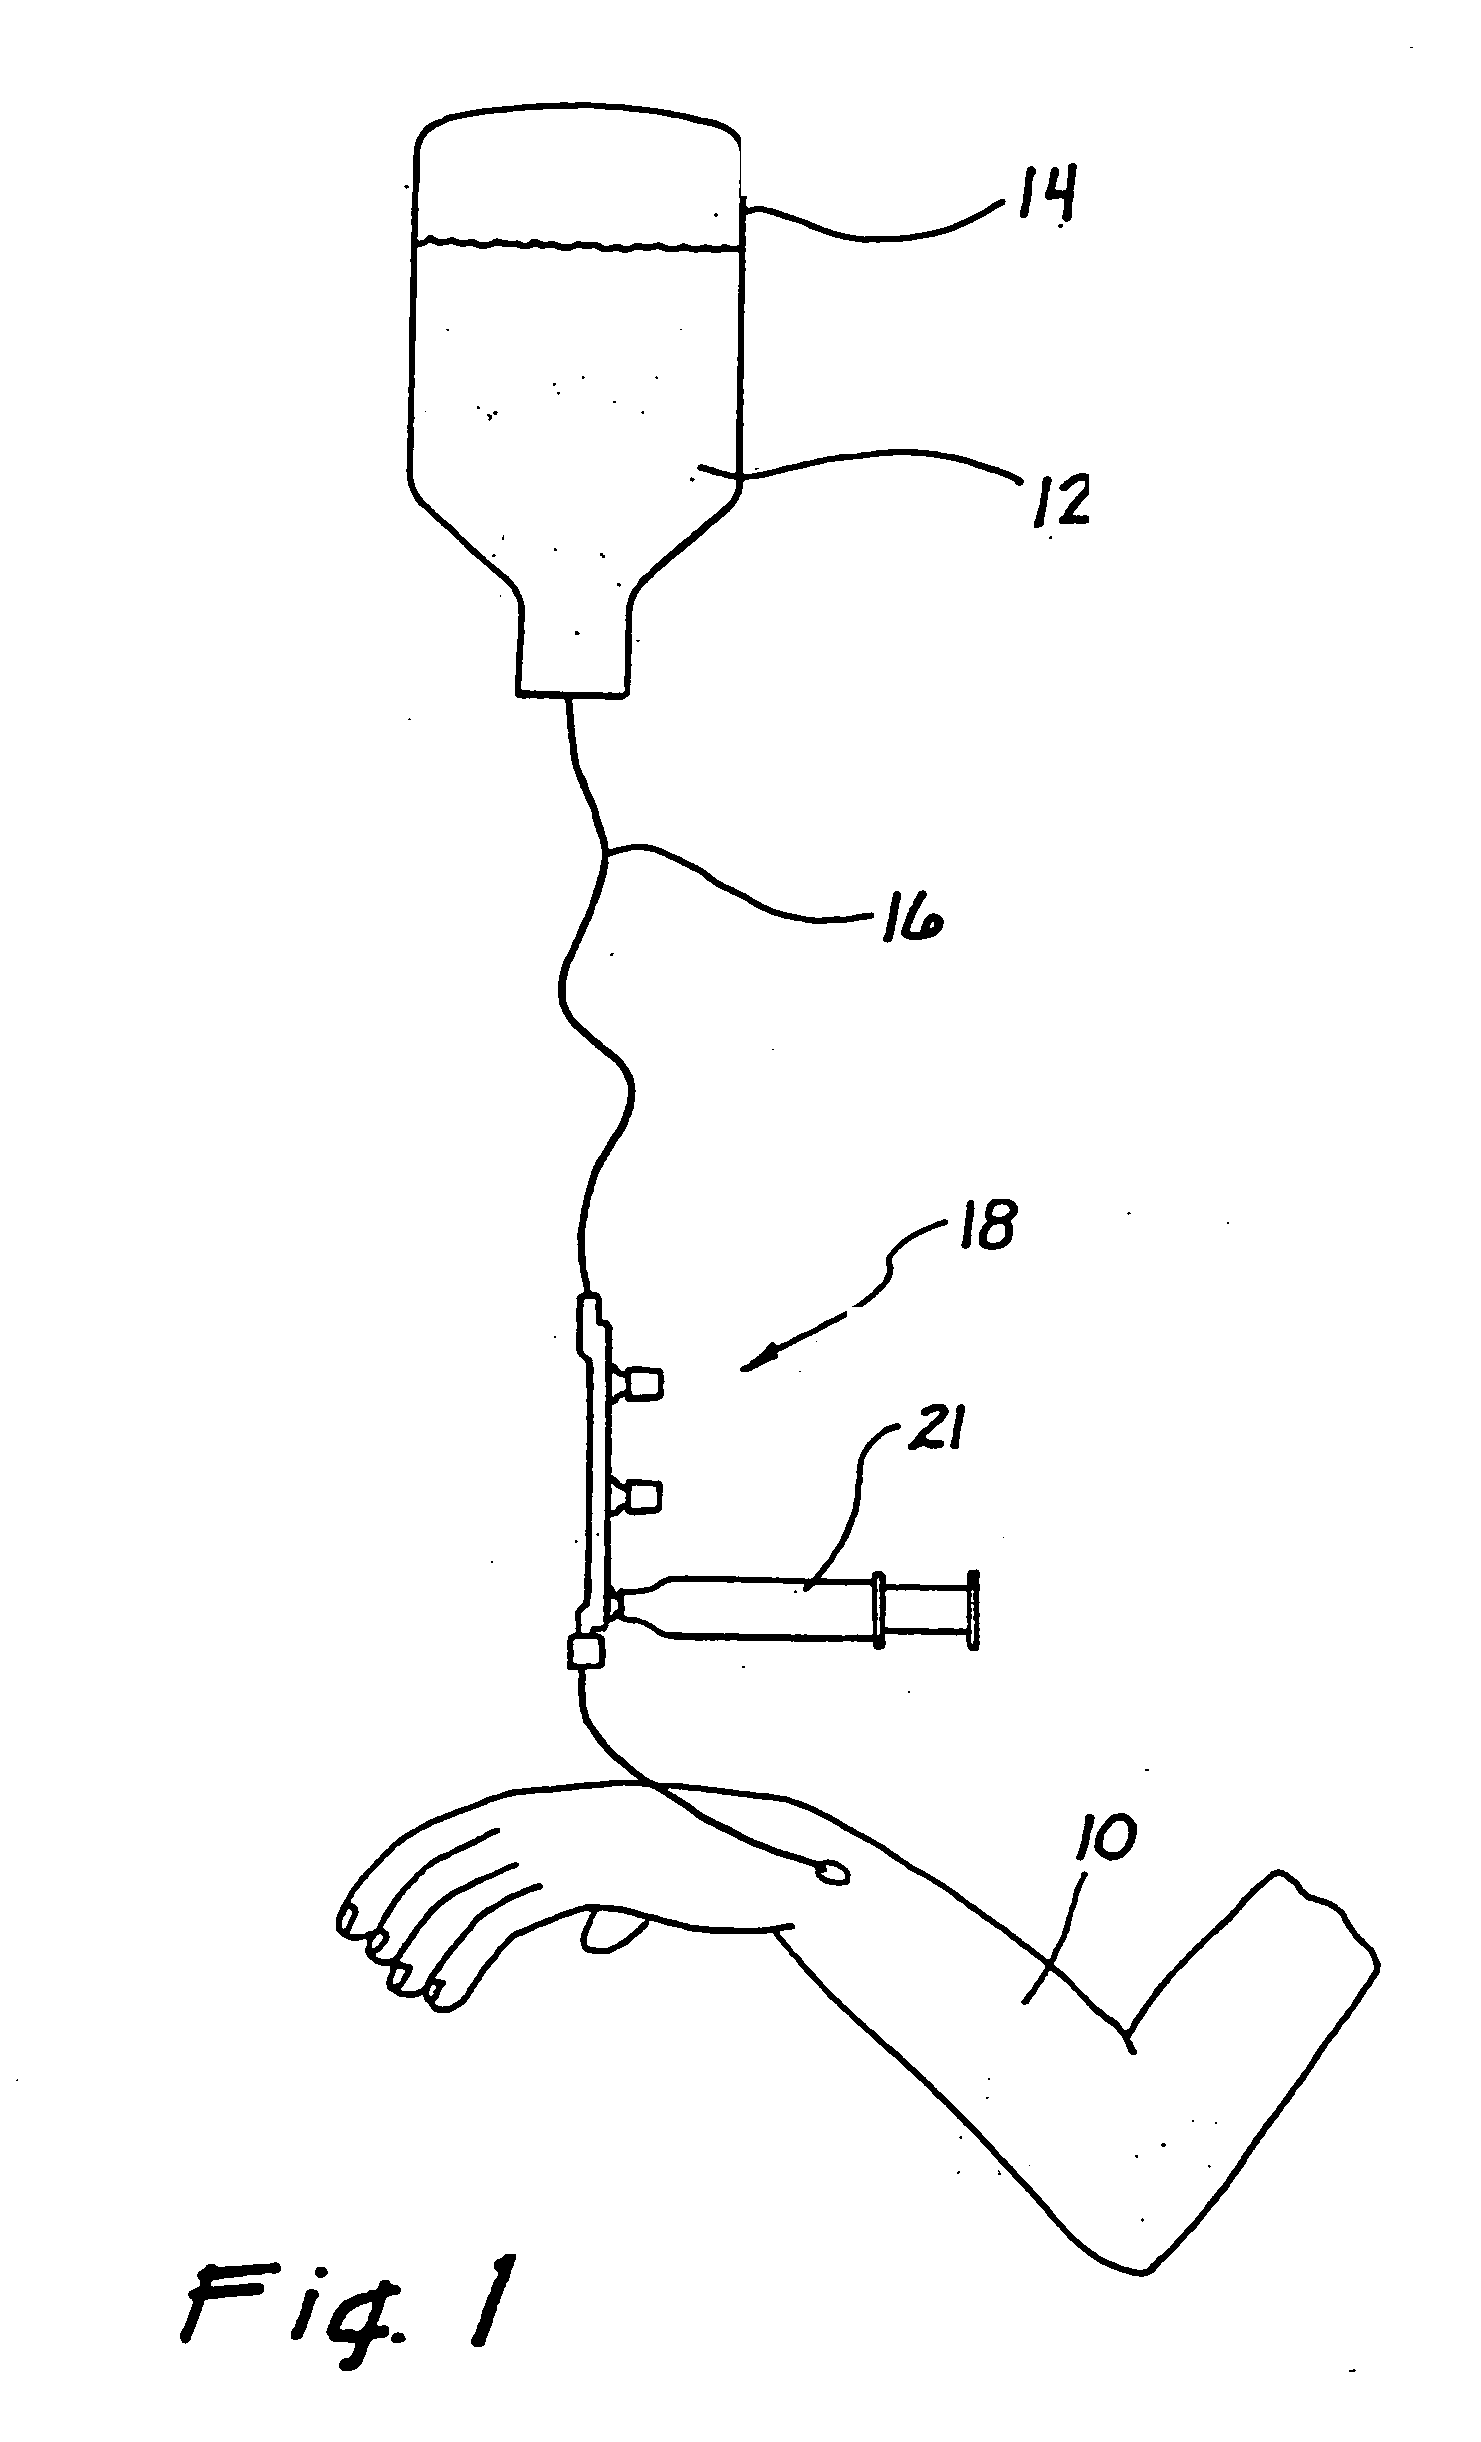 Multi-valve injection/aspiration manifold with needleless access connection